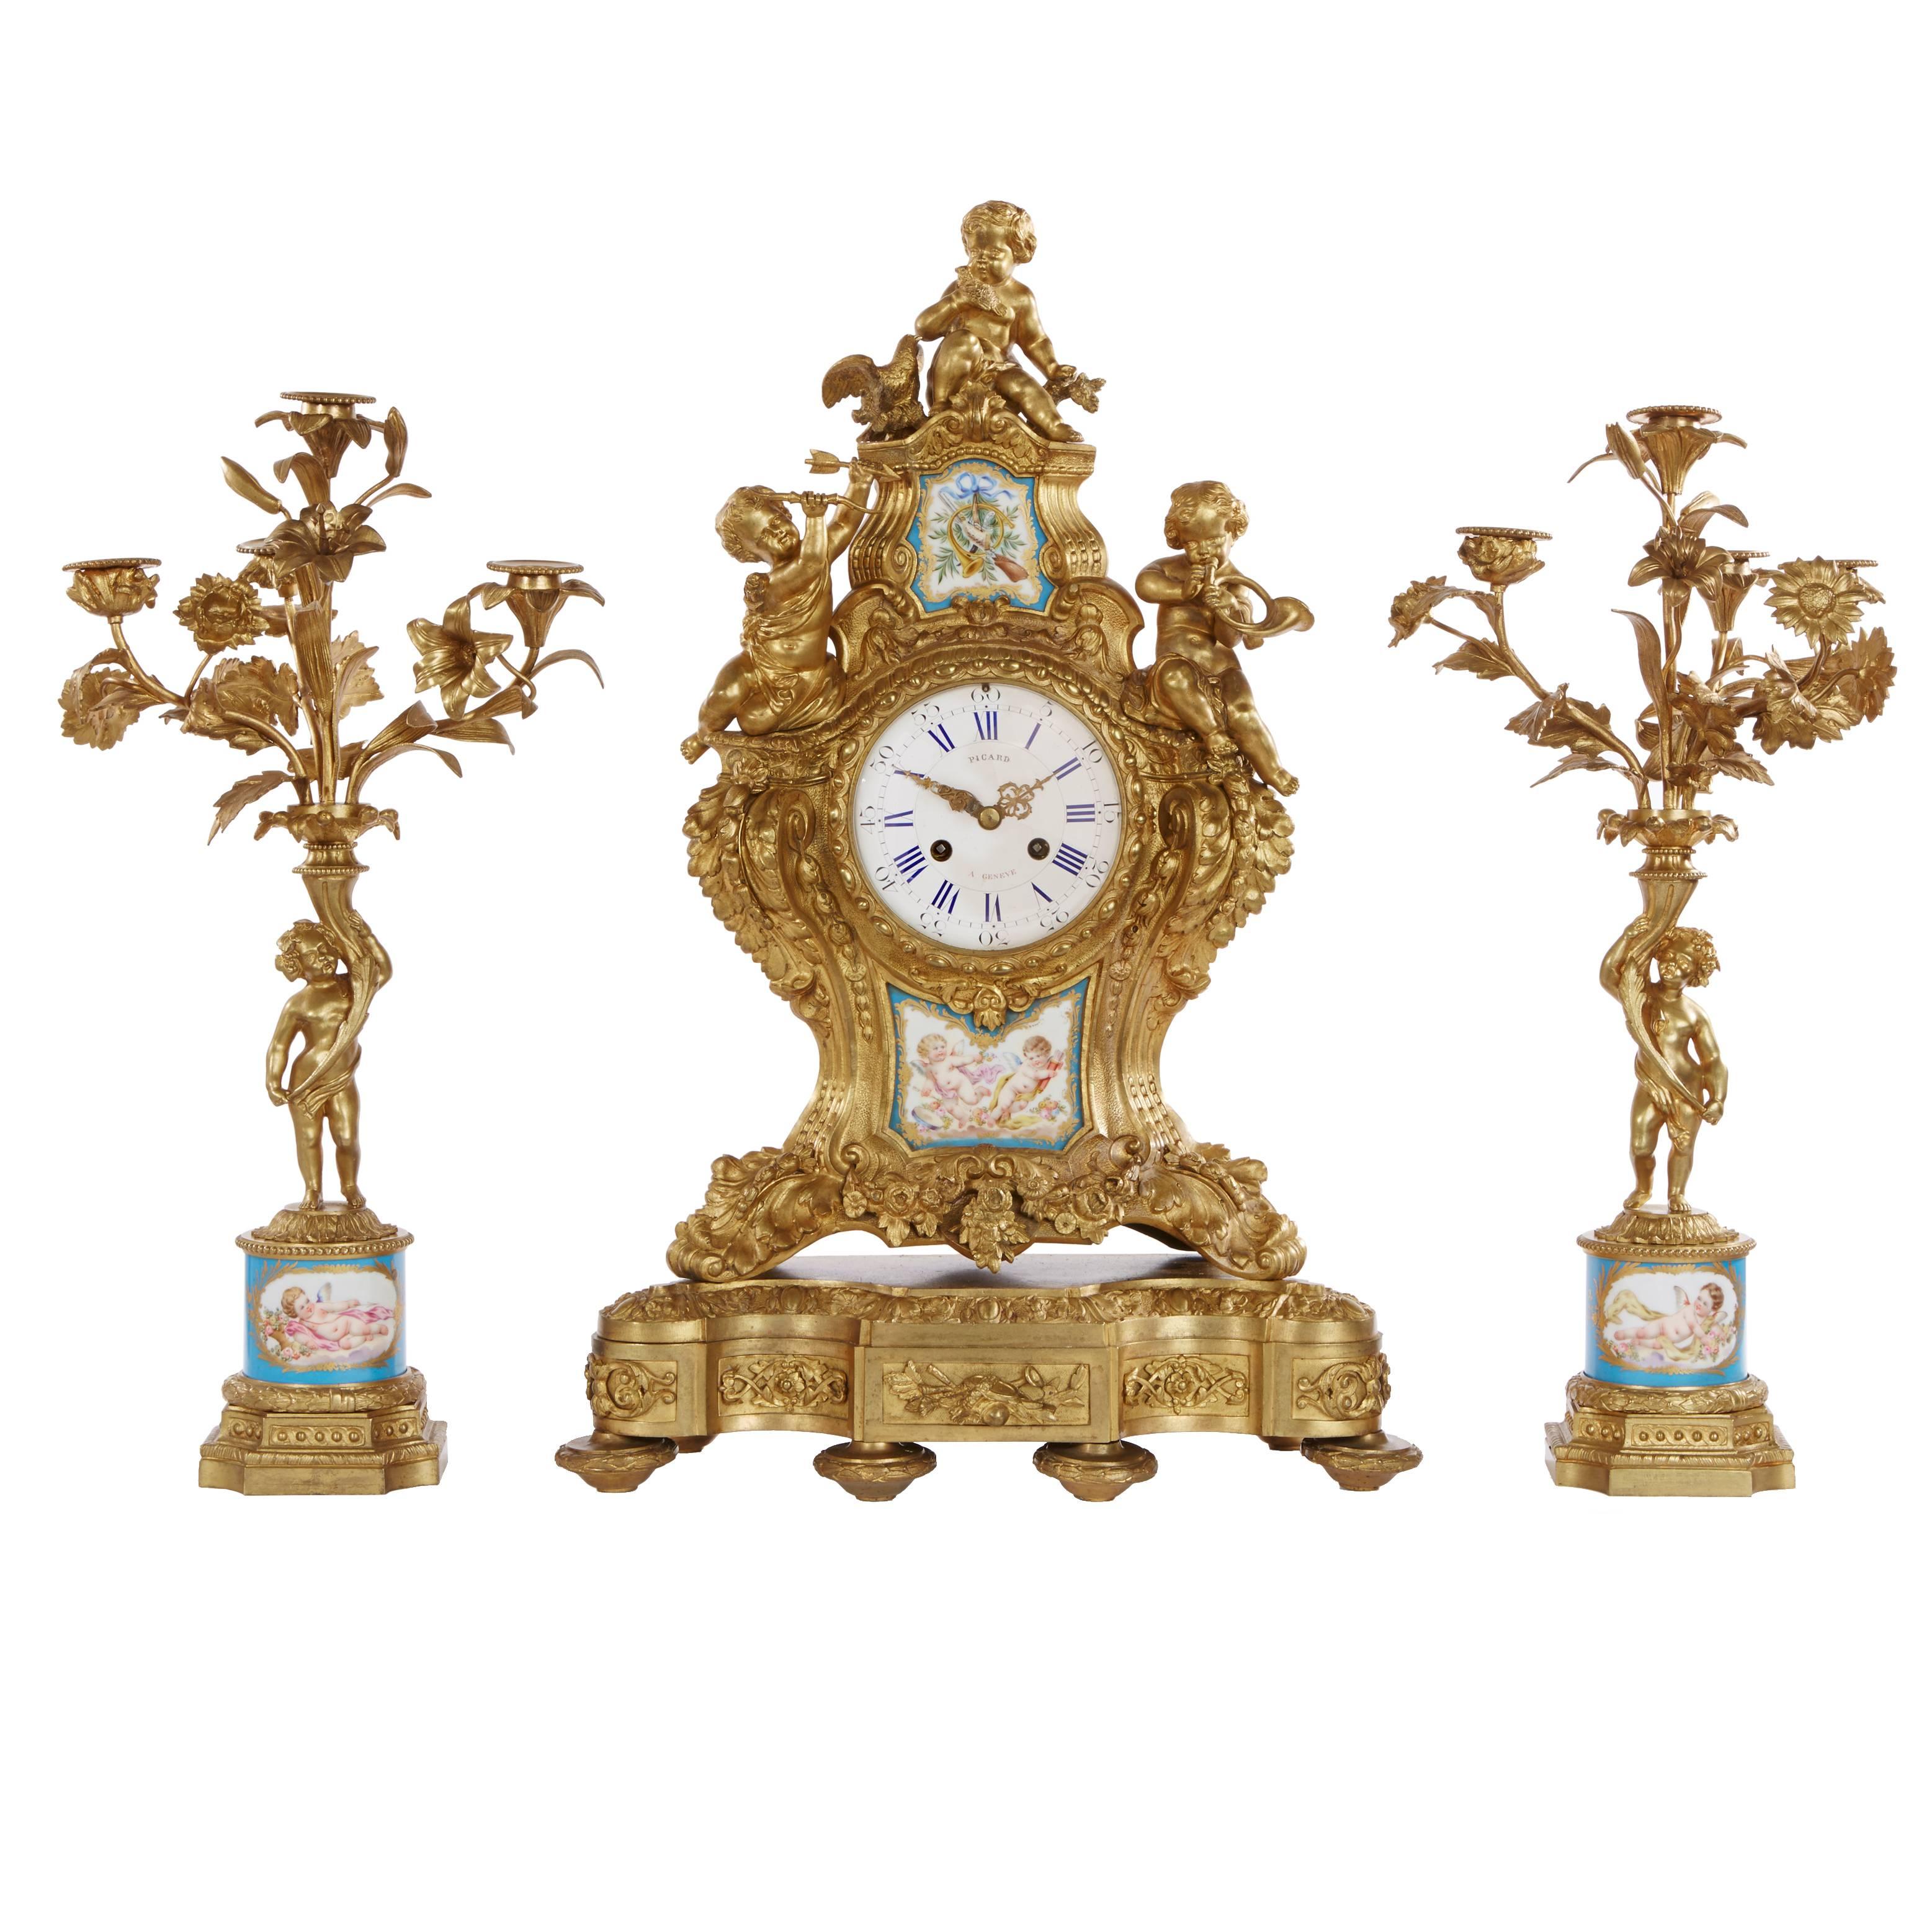 Sèvres Style Porcelain Mounted Ormolu Three-Piece Clock Set by H. Picard For Sale